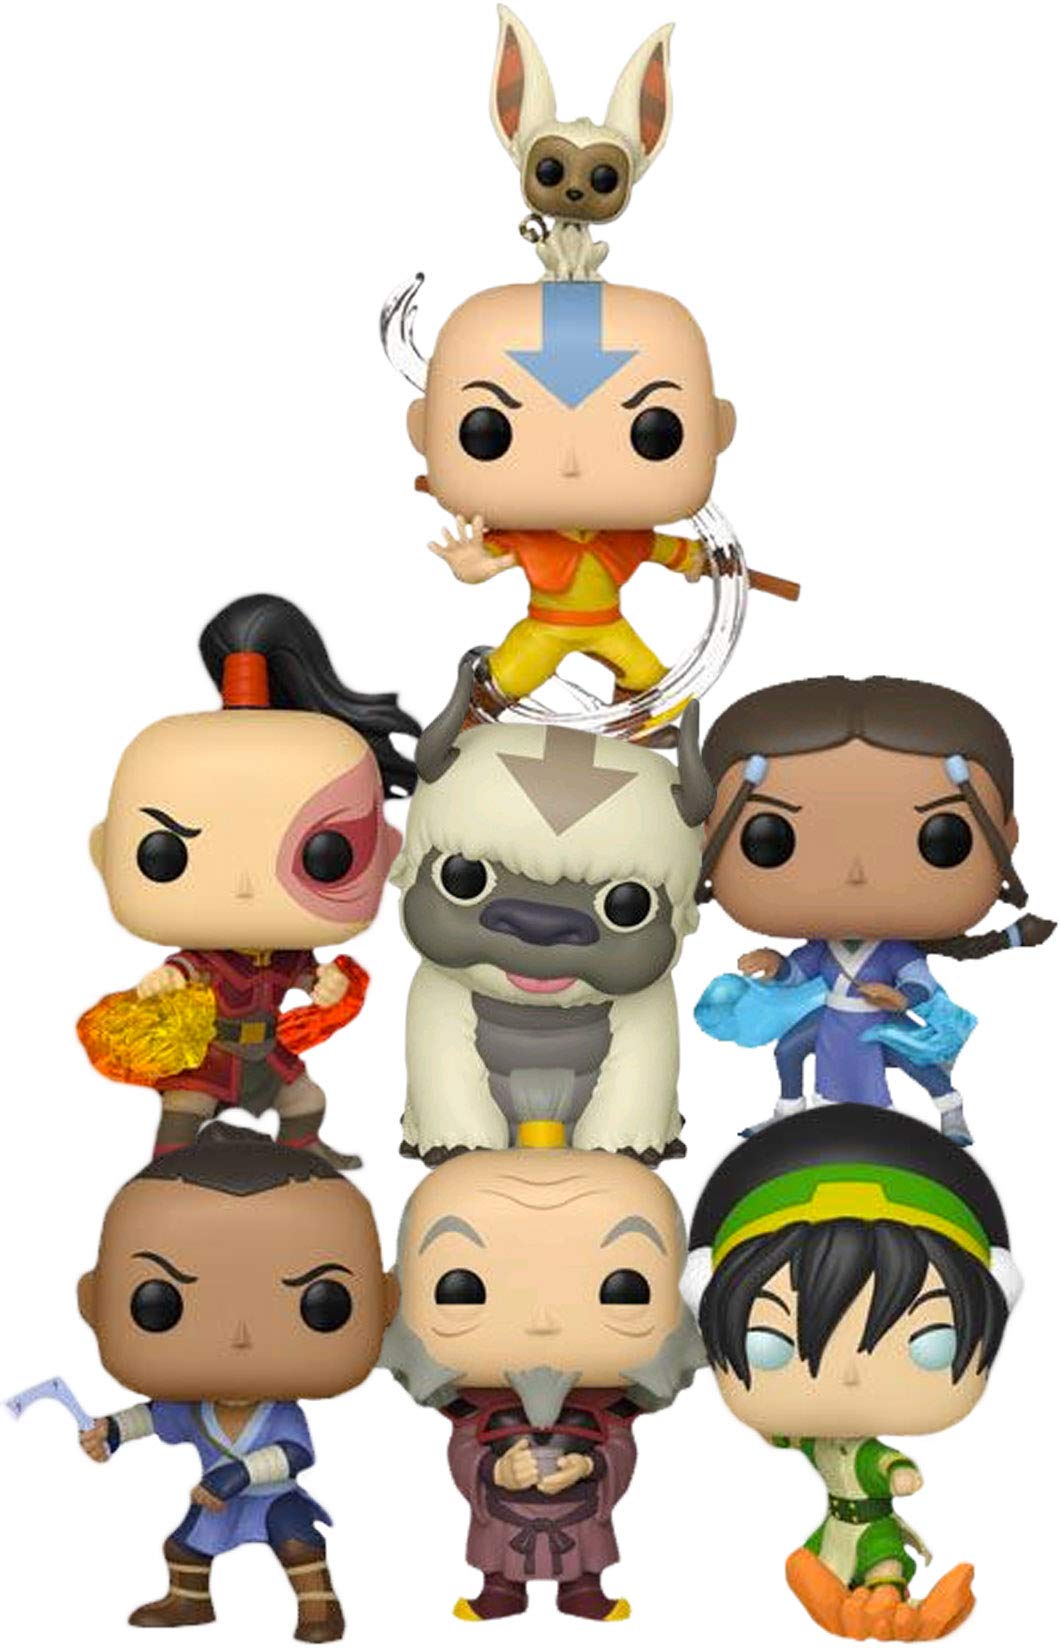 Avatar The Last Airbender  King Bumi Pop Vinyl Figure  Toys and  Collectibles  EB Games Australia